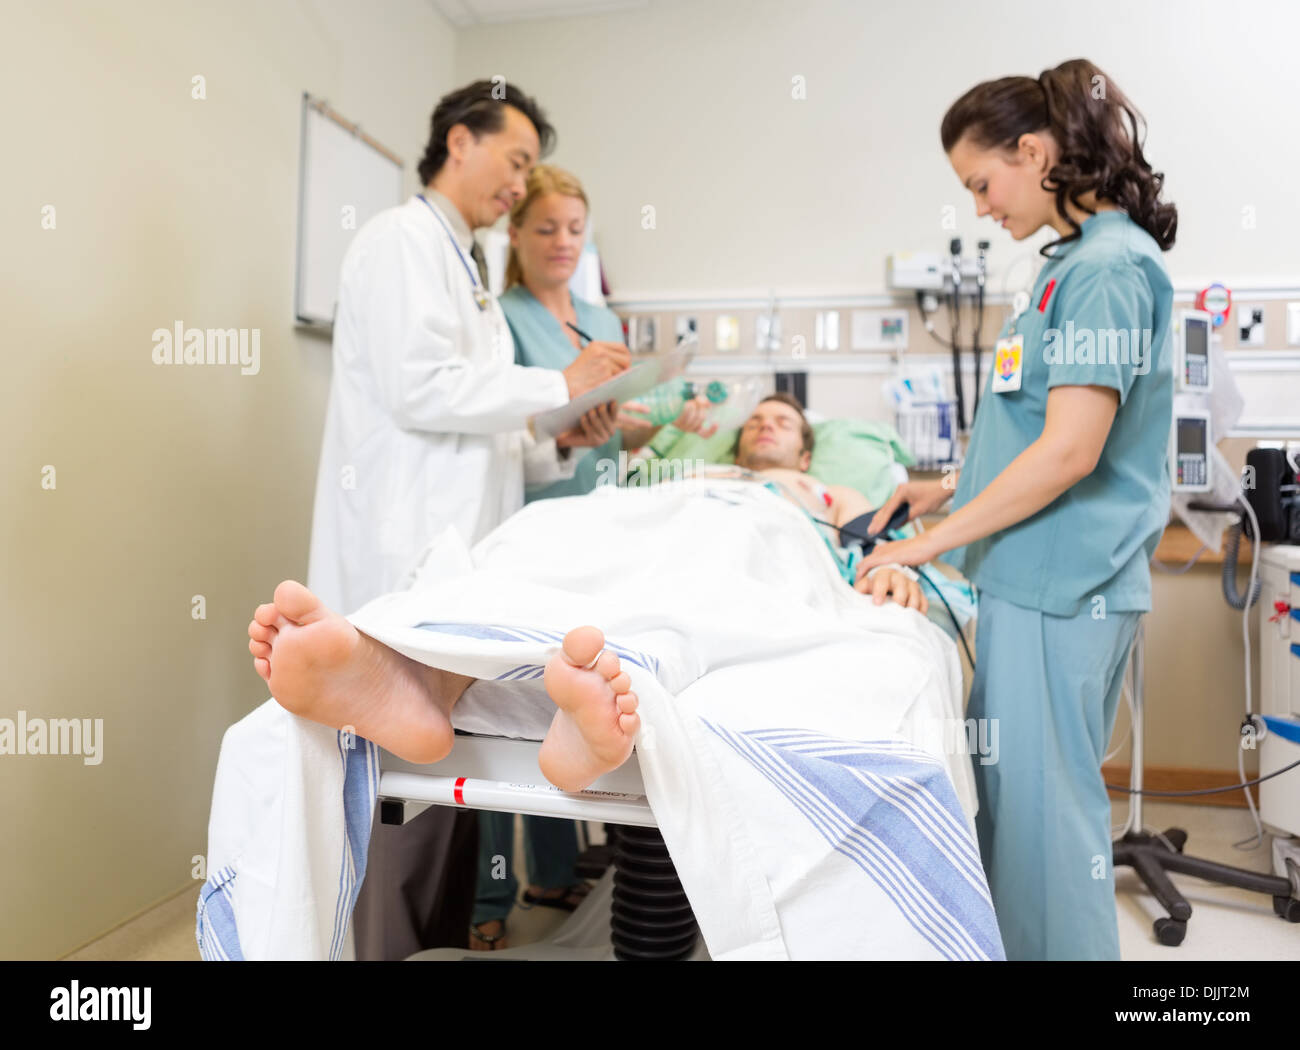 Medical Team And Patient In Hospital Stock Photo